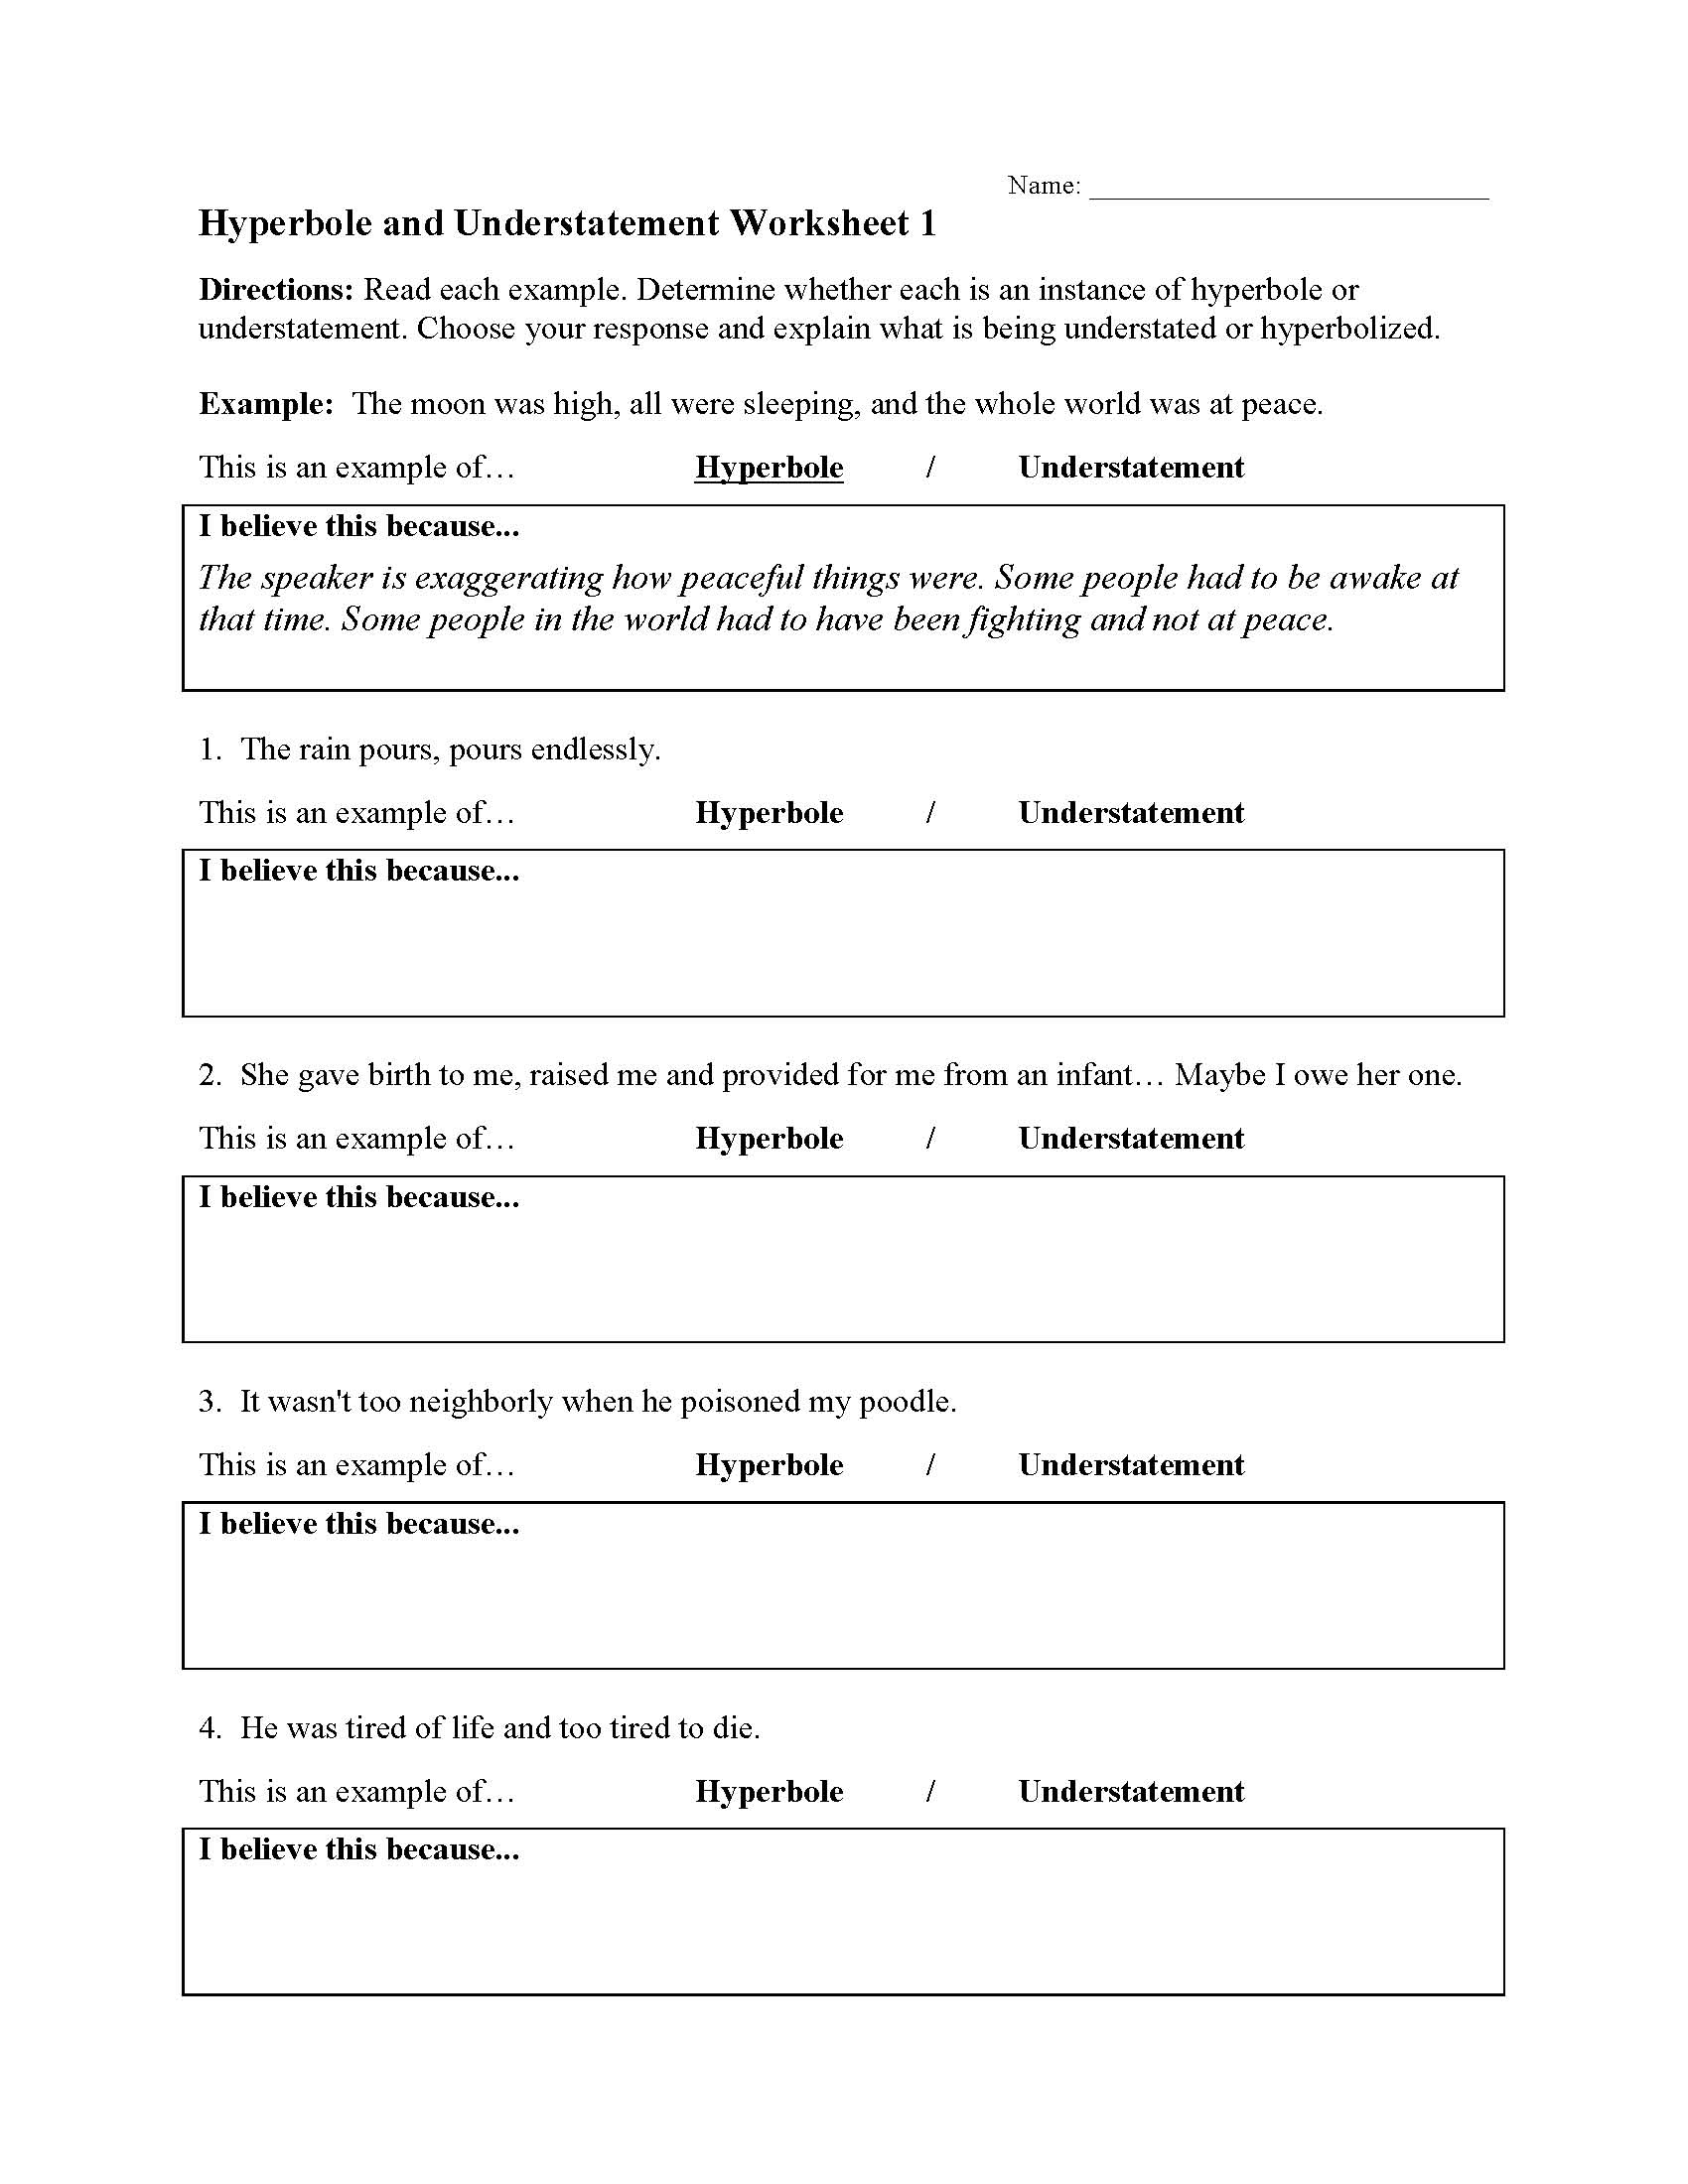 This is a preview image of Hyperbole and Understatement Worksheet 1. Click on it to enlarge it or view the source file.